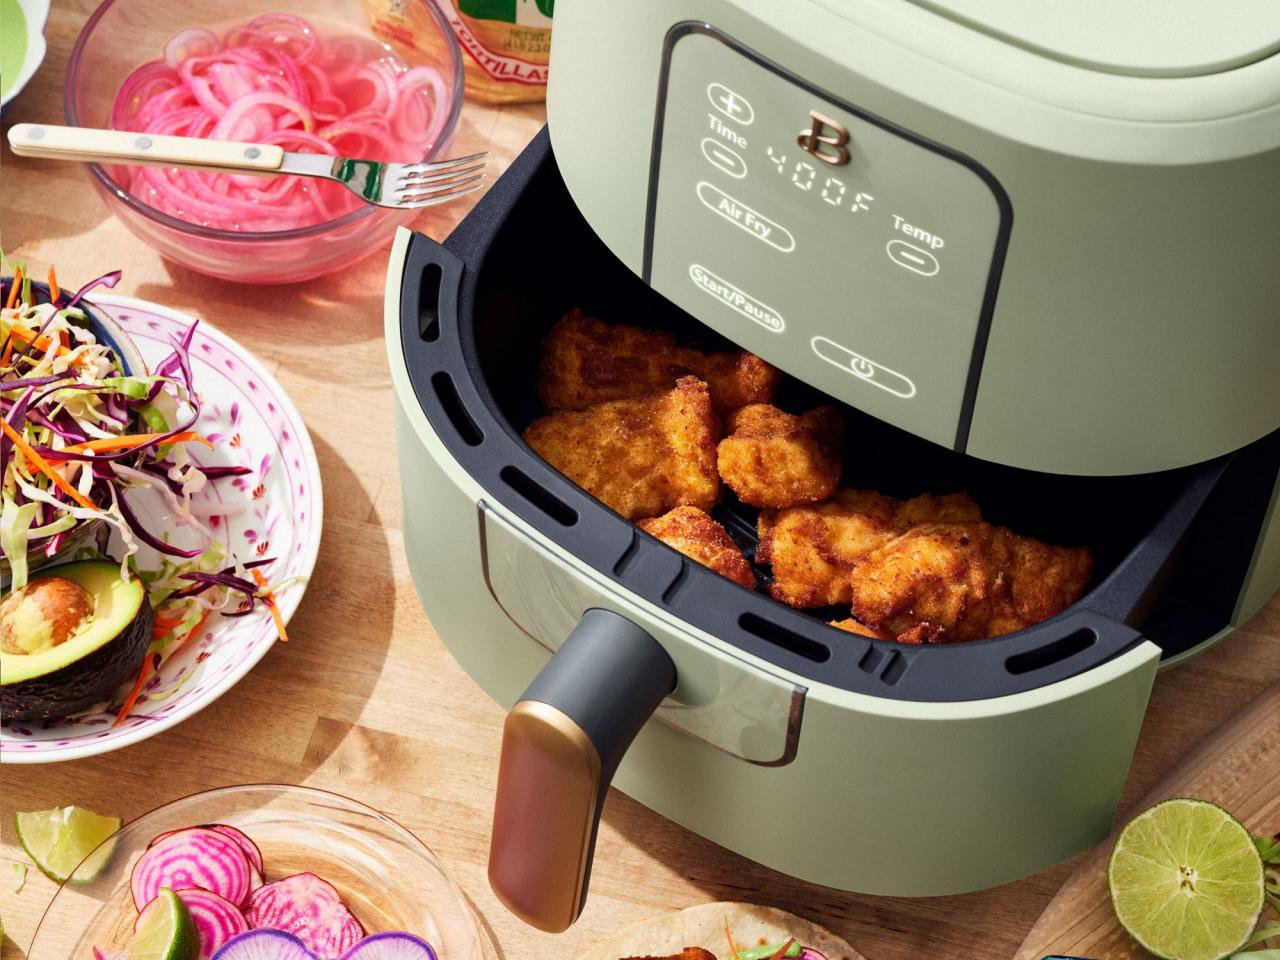 https://food.fnr.sndimg.com/content/dam/images/food/products/2021/4/12/rx_beautiful-by-drew-6-quart-touchscreen-air-fryer.jpeg.rend.hgtvcom.1280.960.suffix/1618255487776.jpeg